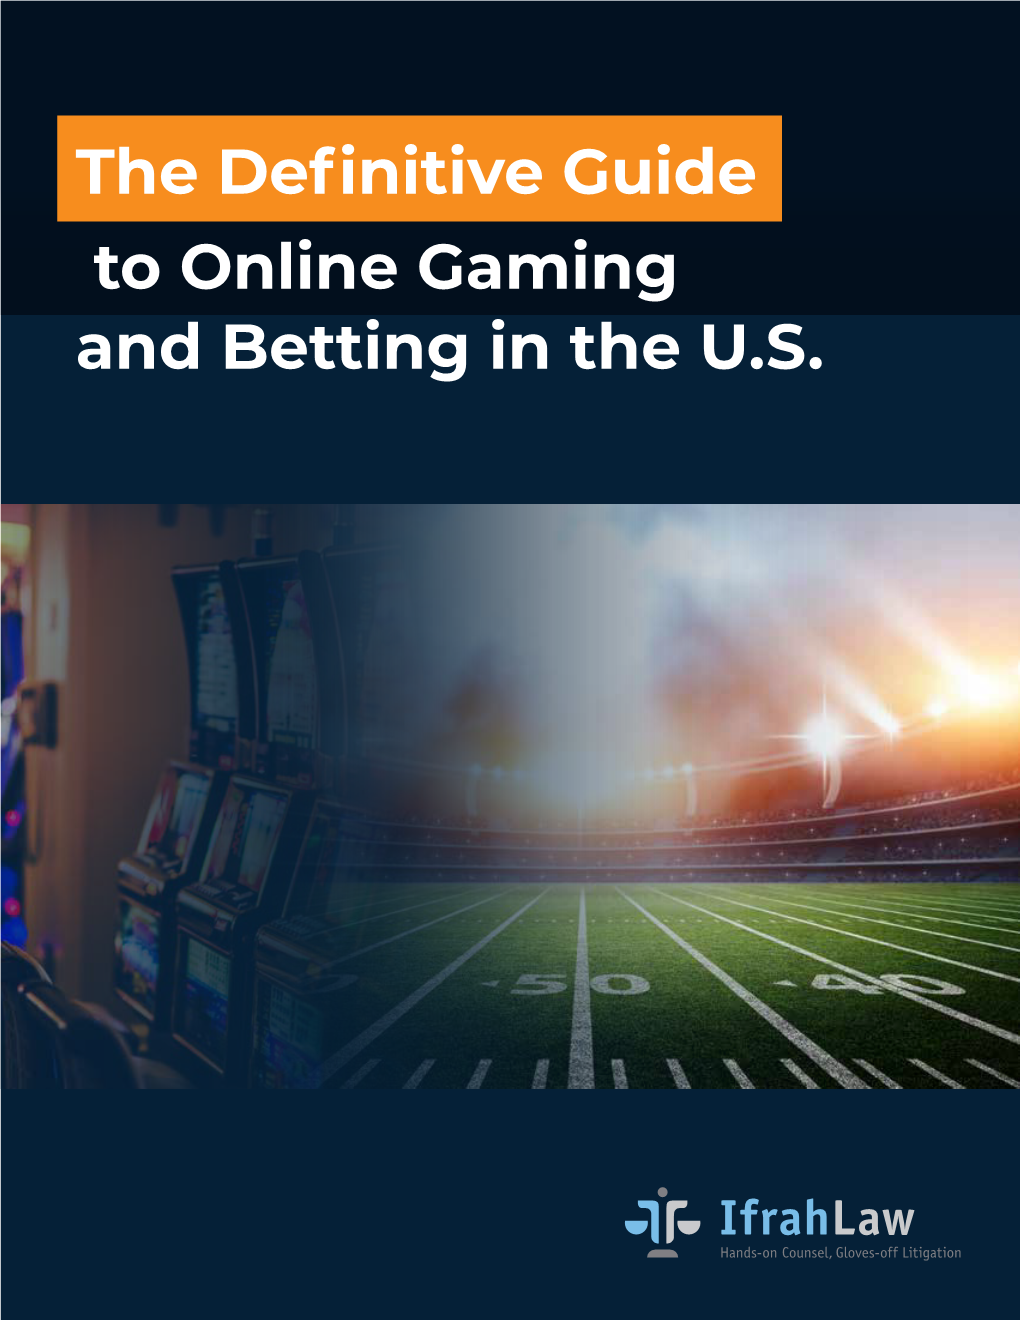 The Definitive Guide to Online Gaming and Betting in the U.S. TABLE of CONTENTS